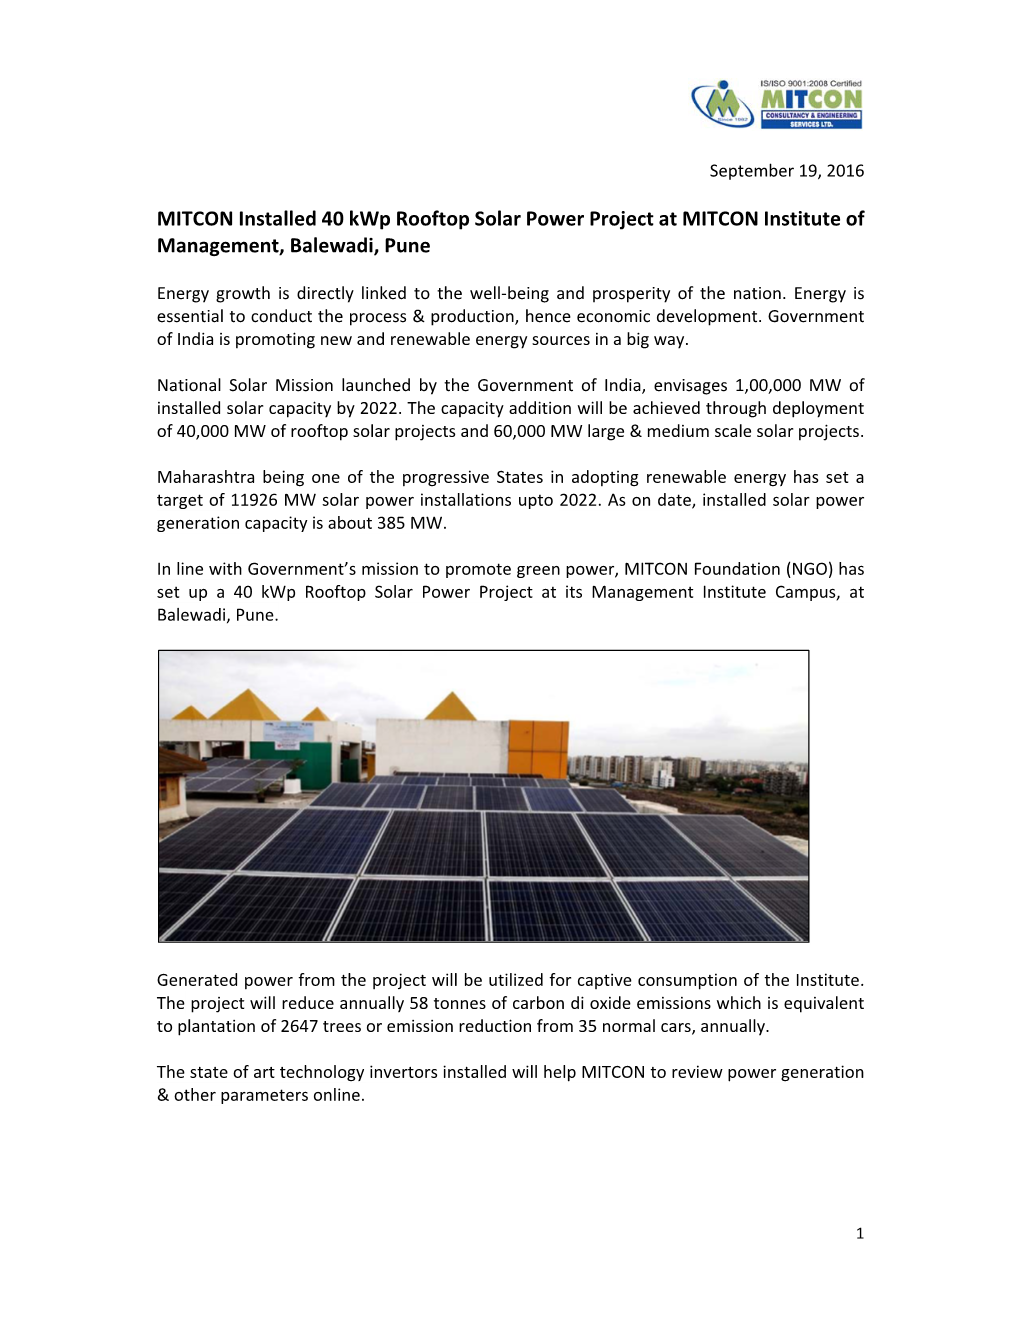 MITCON Installed 40 Kwp Rooftop Solar Power Project at MITCON Institute of Management, Balewadi, Pune